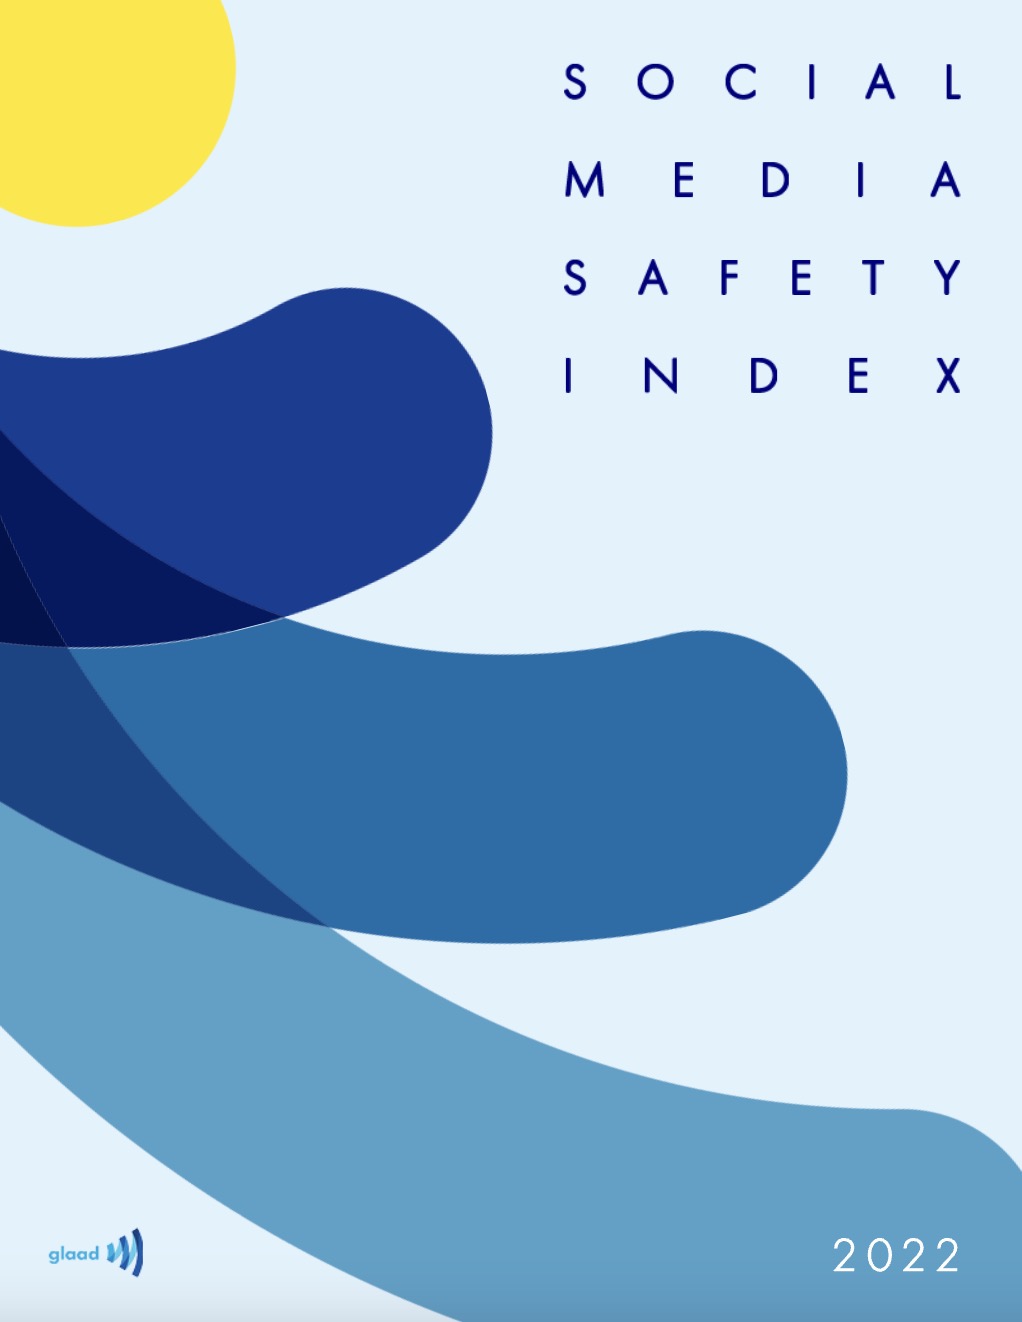 Explore the 2022 GLAAD Social Media Safety Index